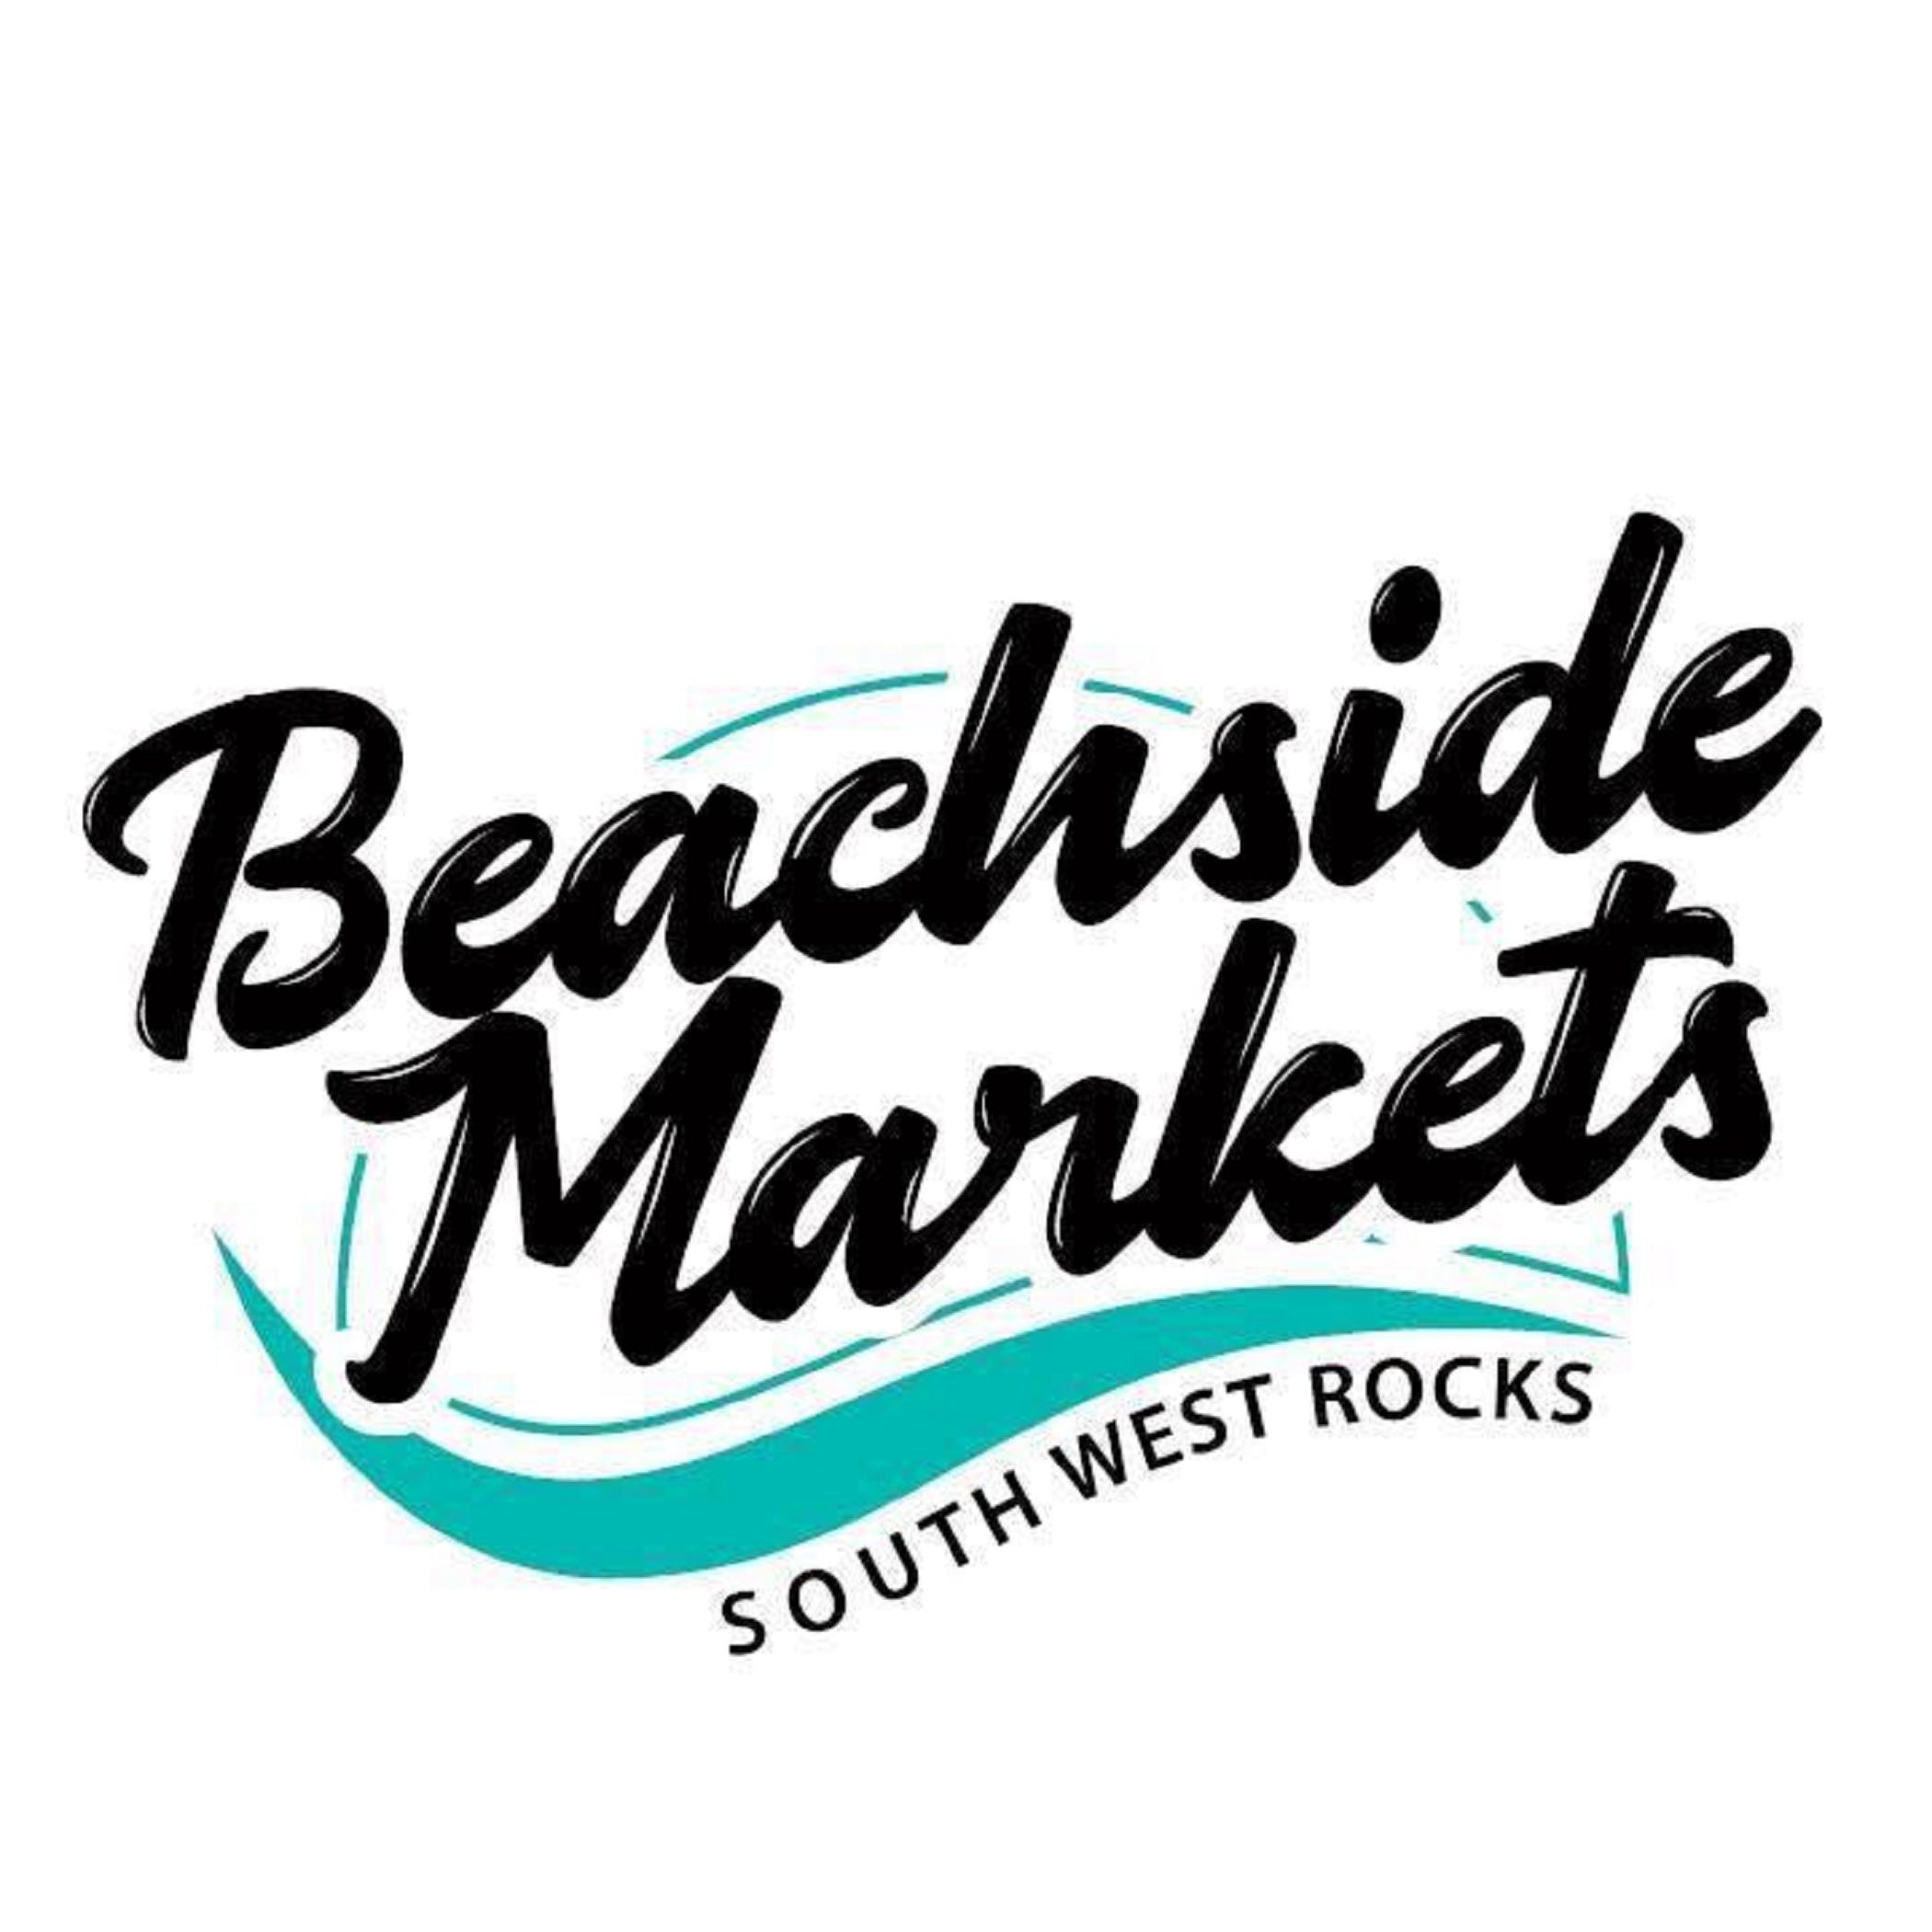 Beachside Markets South West Rocks - Accommodation Cooktown